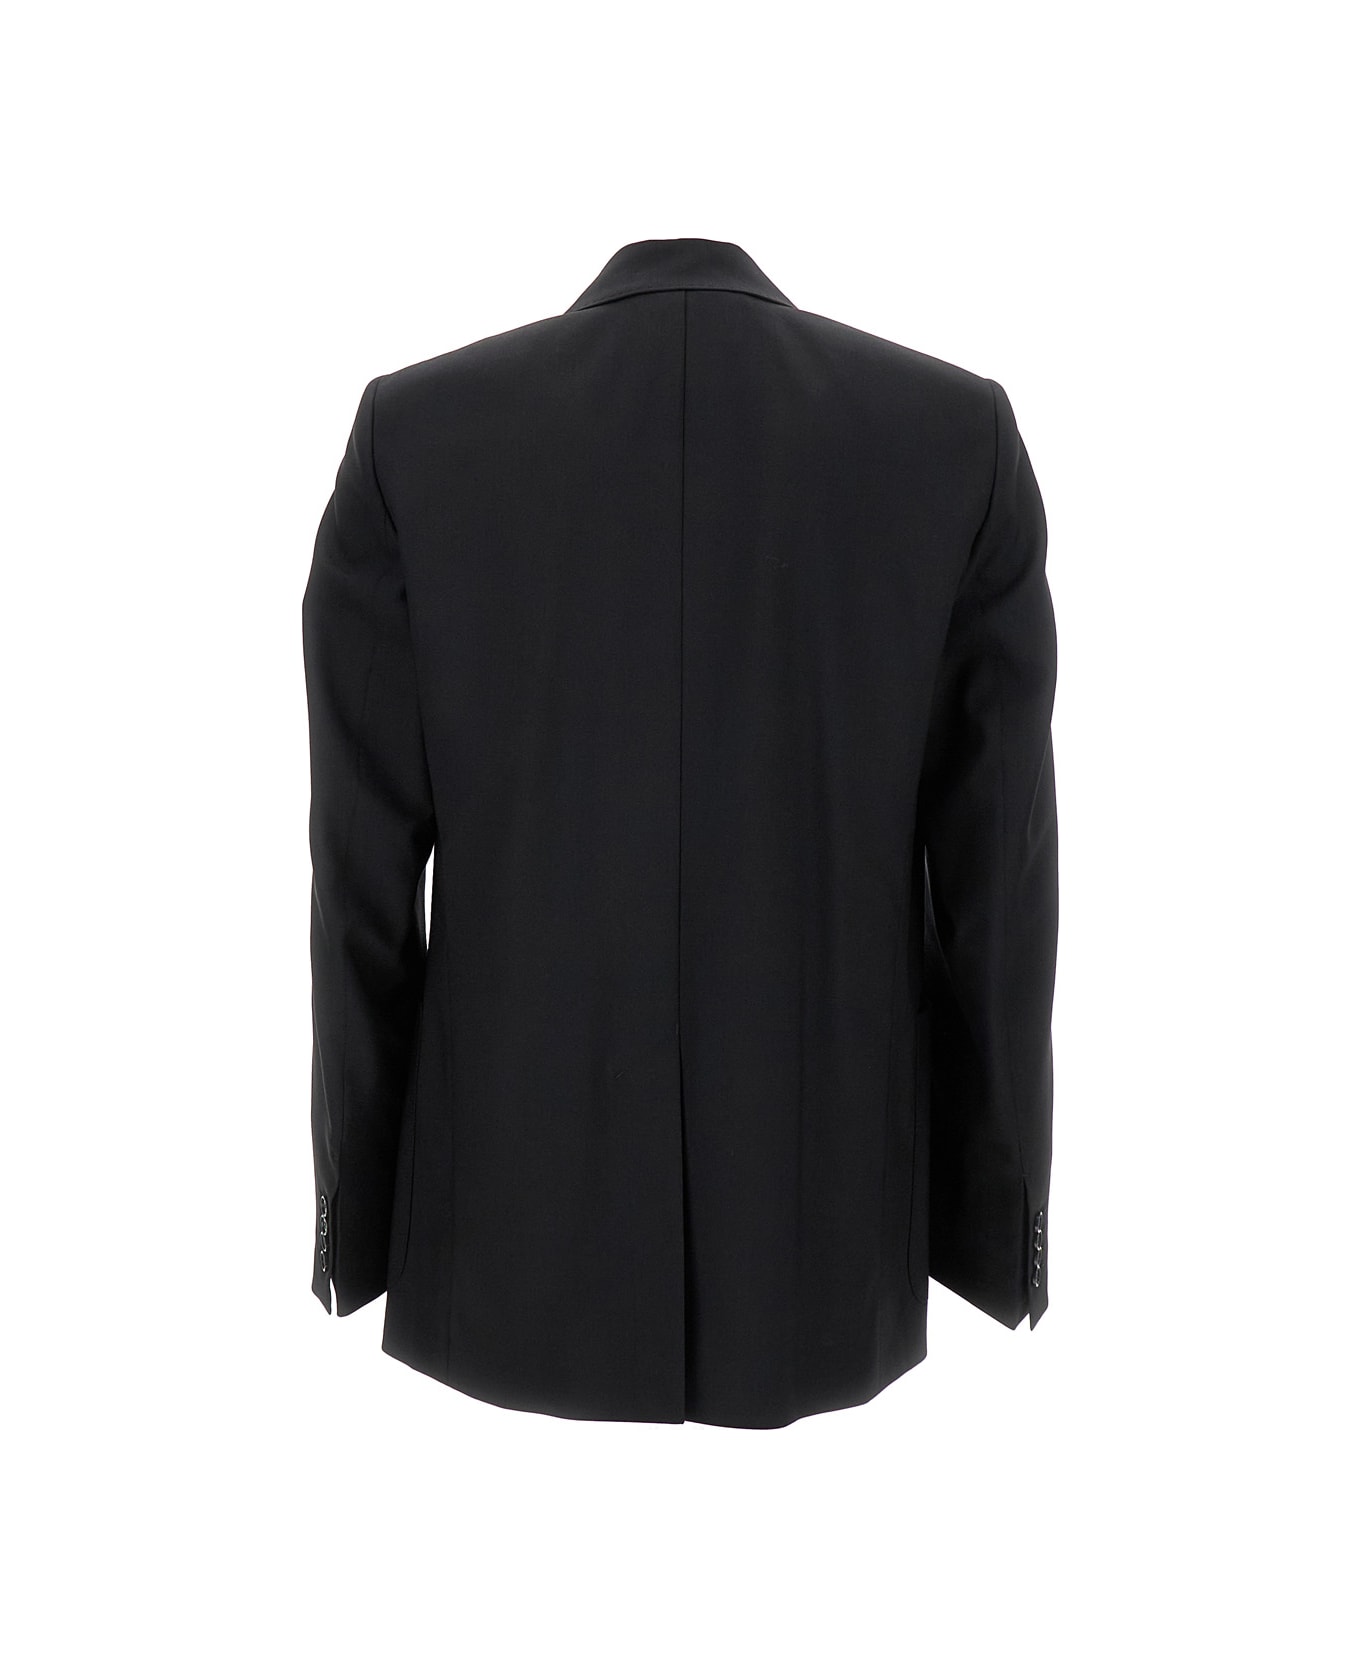 Ami Alexandre Mattiussi Black Double Breasted Blazer With Buttons In Wool Man - BLACK コート